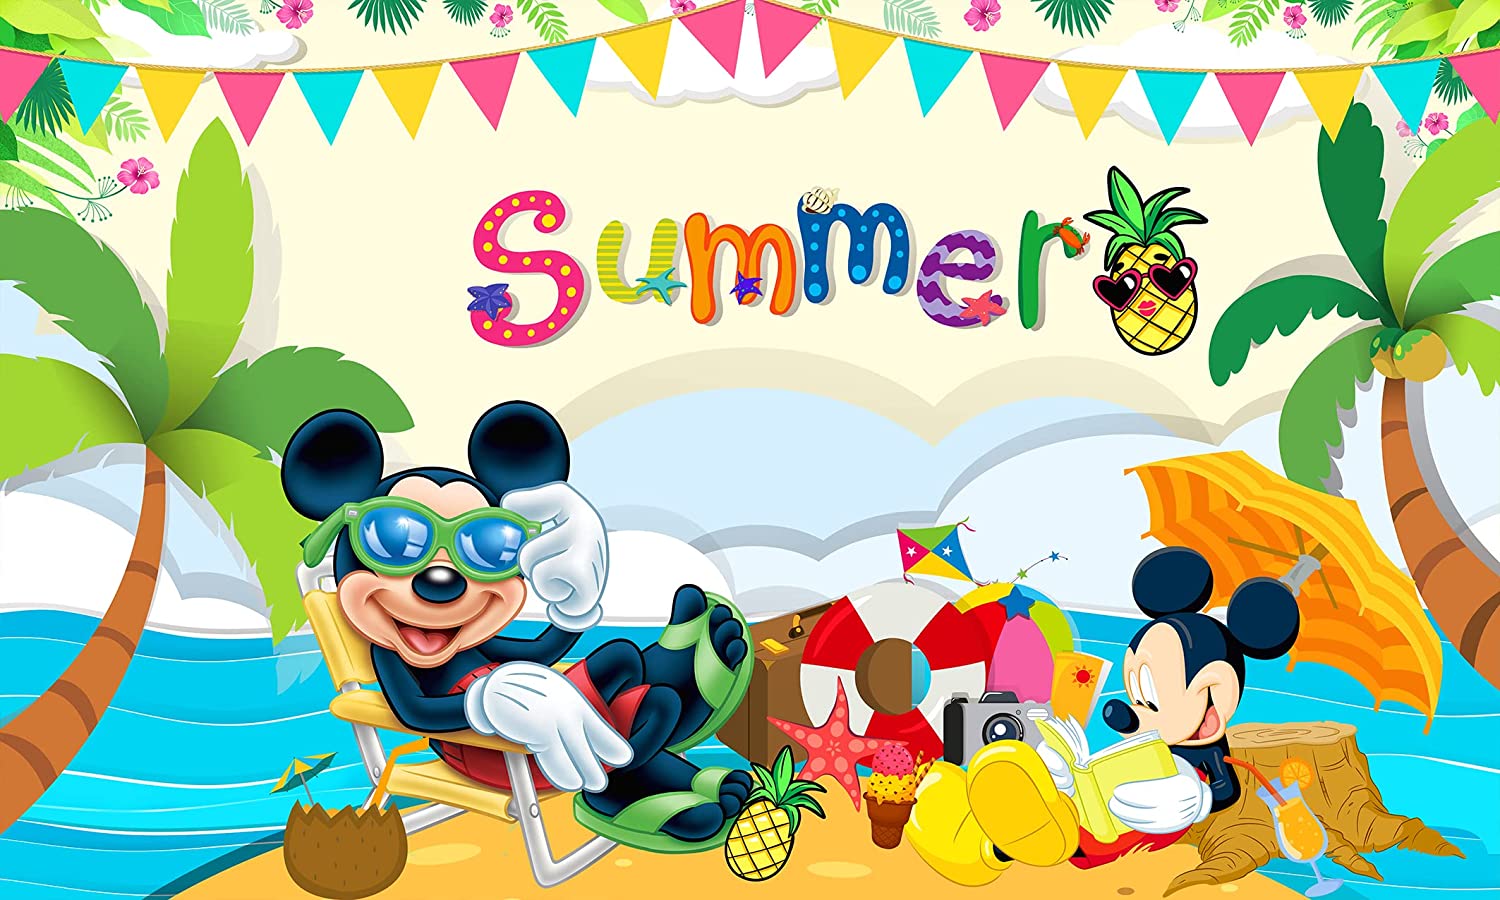 Summer Tropical Tawaii Aloha Backdrop Birthday Party Supplies 5x3ft Beach Photo Background Mickey Mouse Theme Baby Shower Banner for Birthday Cake Table Decoration, Toys & Games